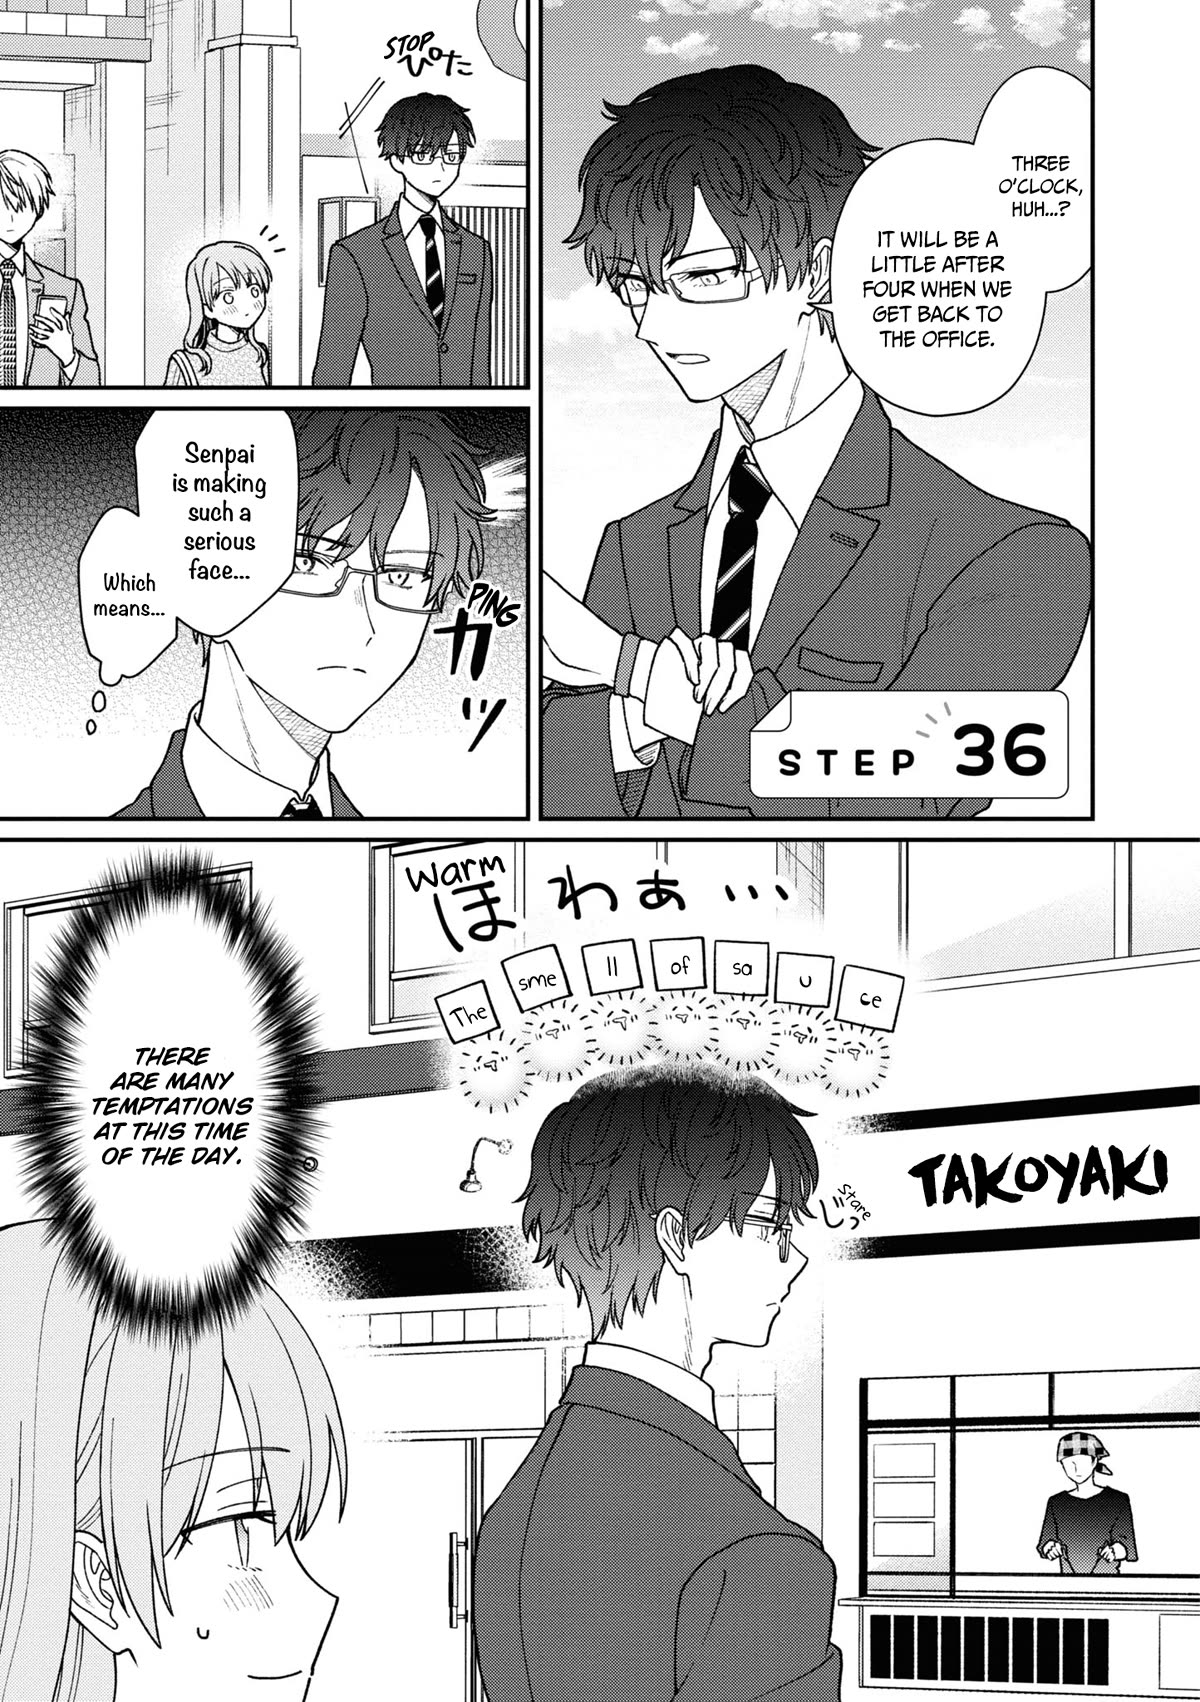 The New-Hire Who Could "Read" Emotions and the Unsociable Senpai - chapter 36 - #2